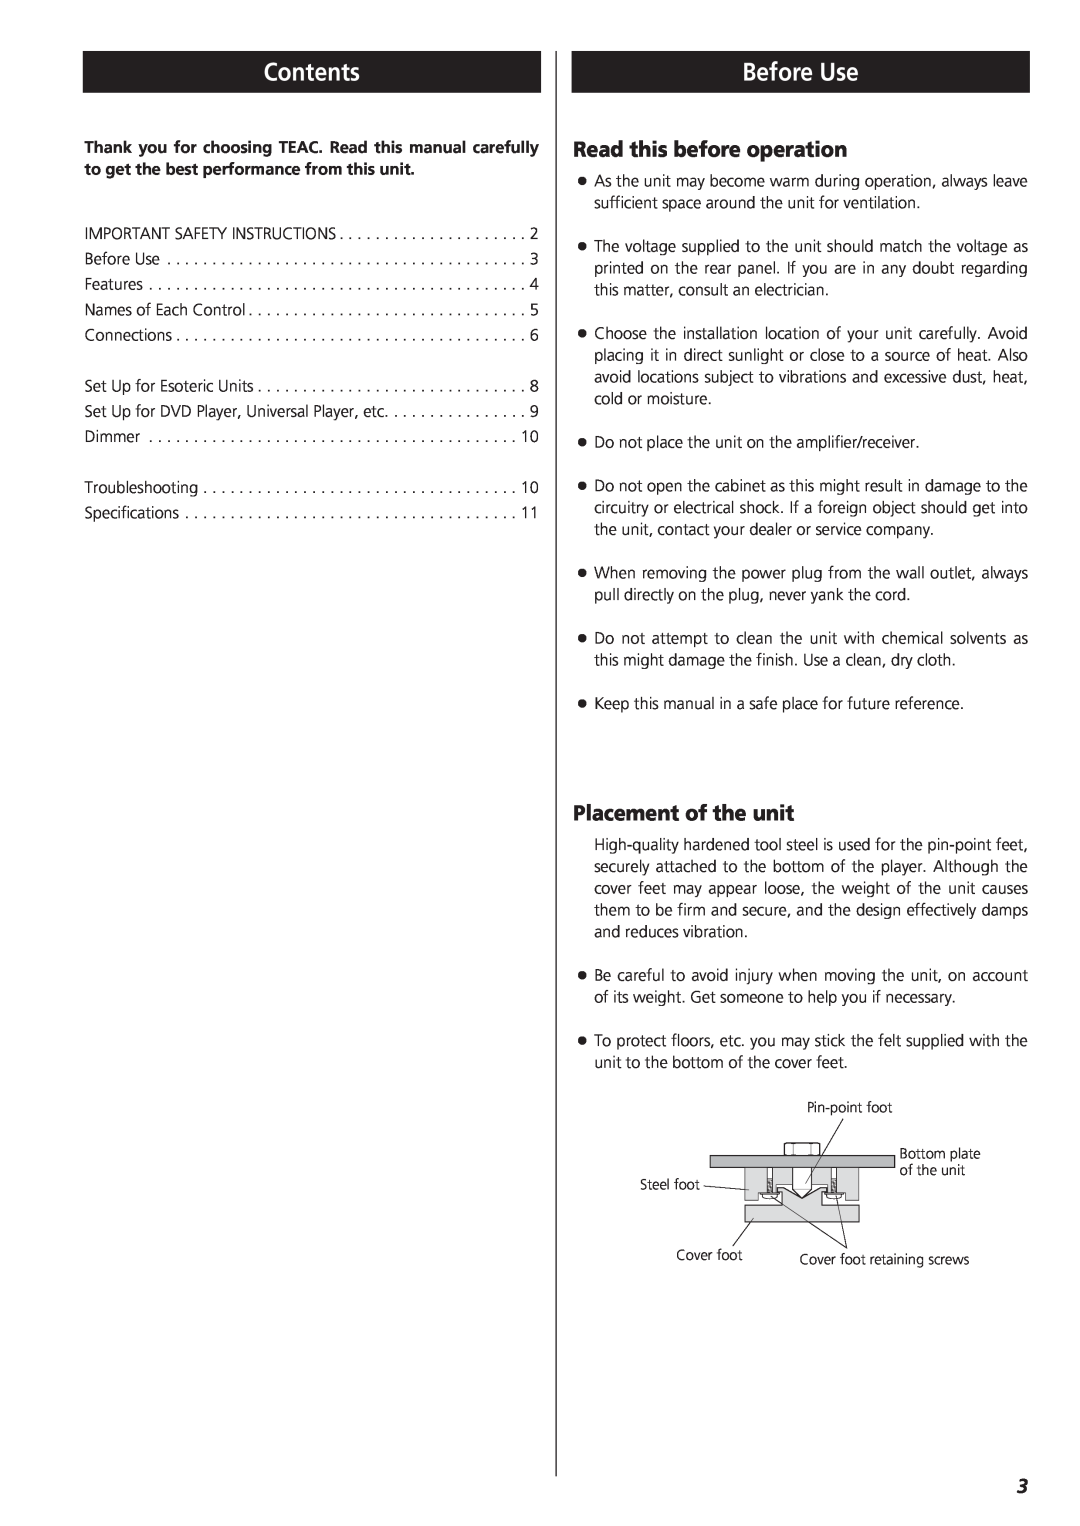 Teac G-0s owner manual Contents, Before Use, Read this before operation, Placement of the unit 